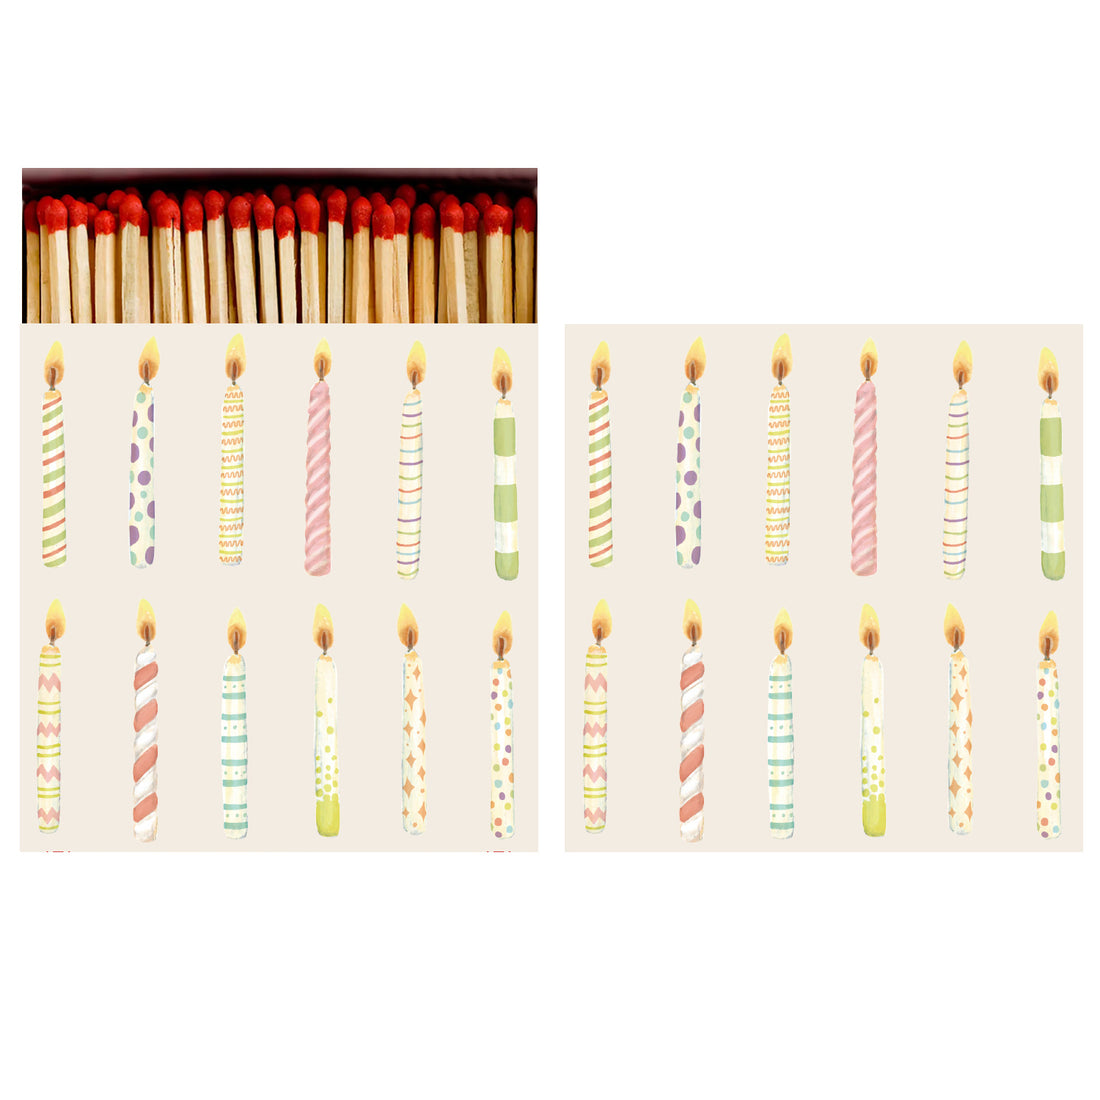 Two identical sides of a square match box, the left of which is open slightly to reveal the matches inside. The artwork on the box depicts a dozen colorful, lit birthday candles evenly spaced in two rows over a cream background.